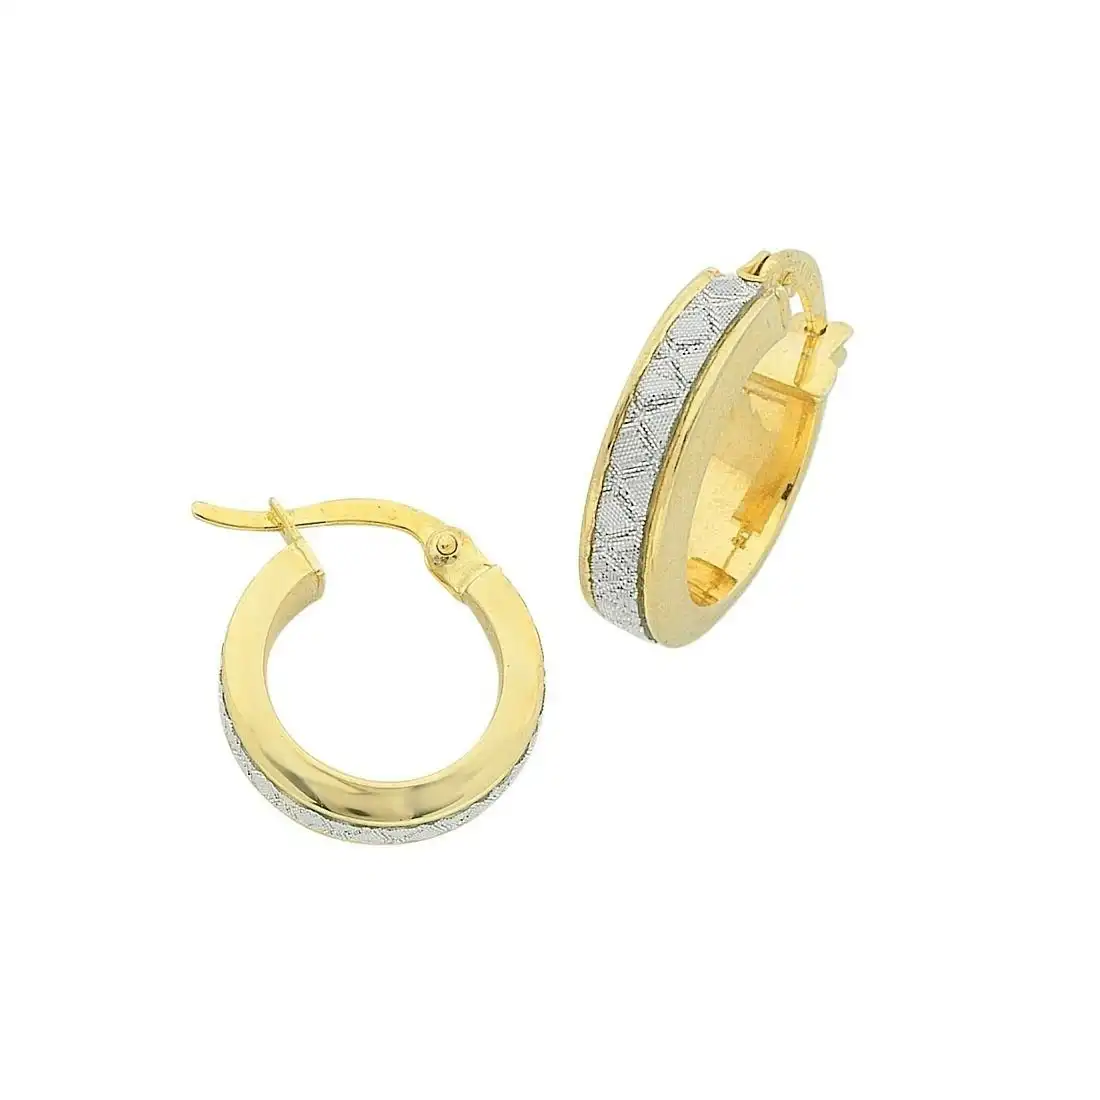 9ct Yellow Gold Silver Infused Stardust Criss Cross Hoop Earrings 25mm